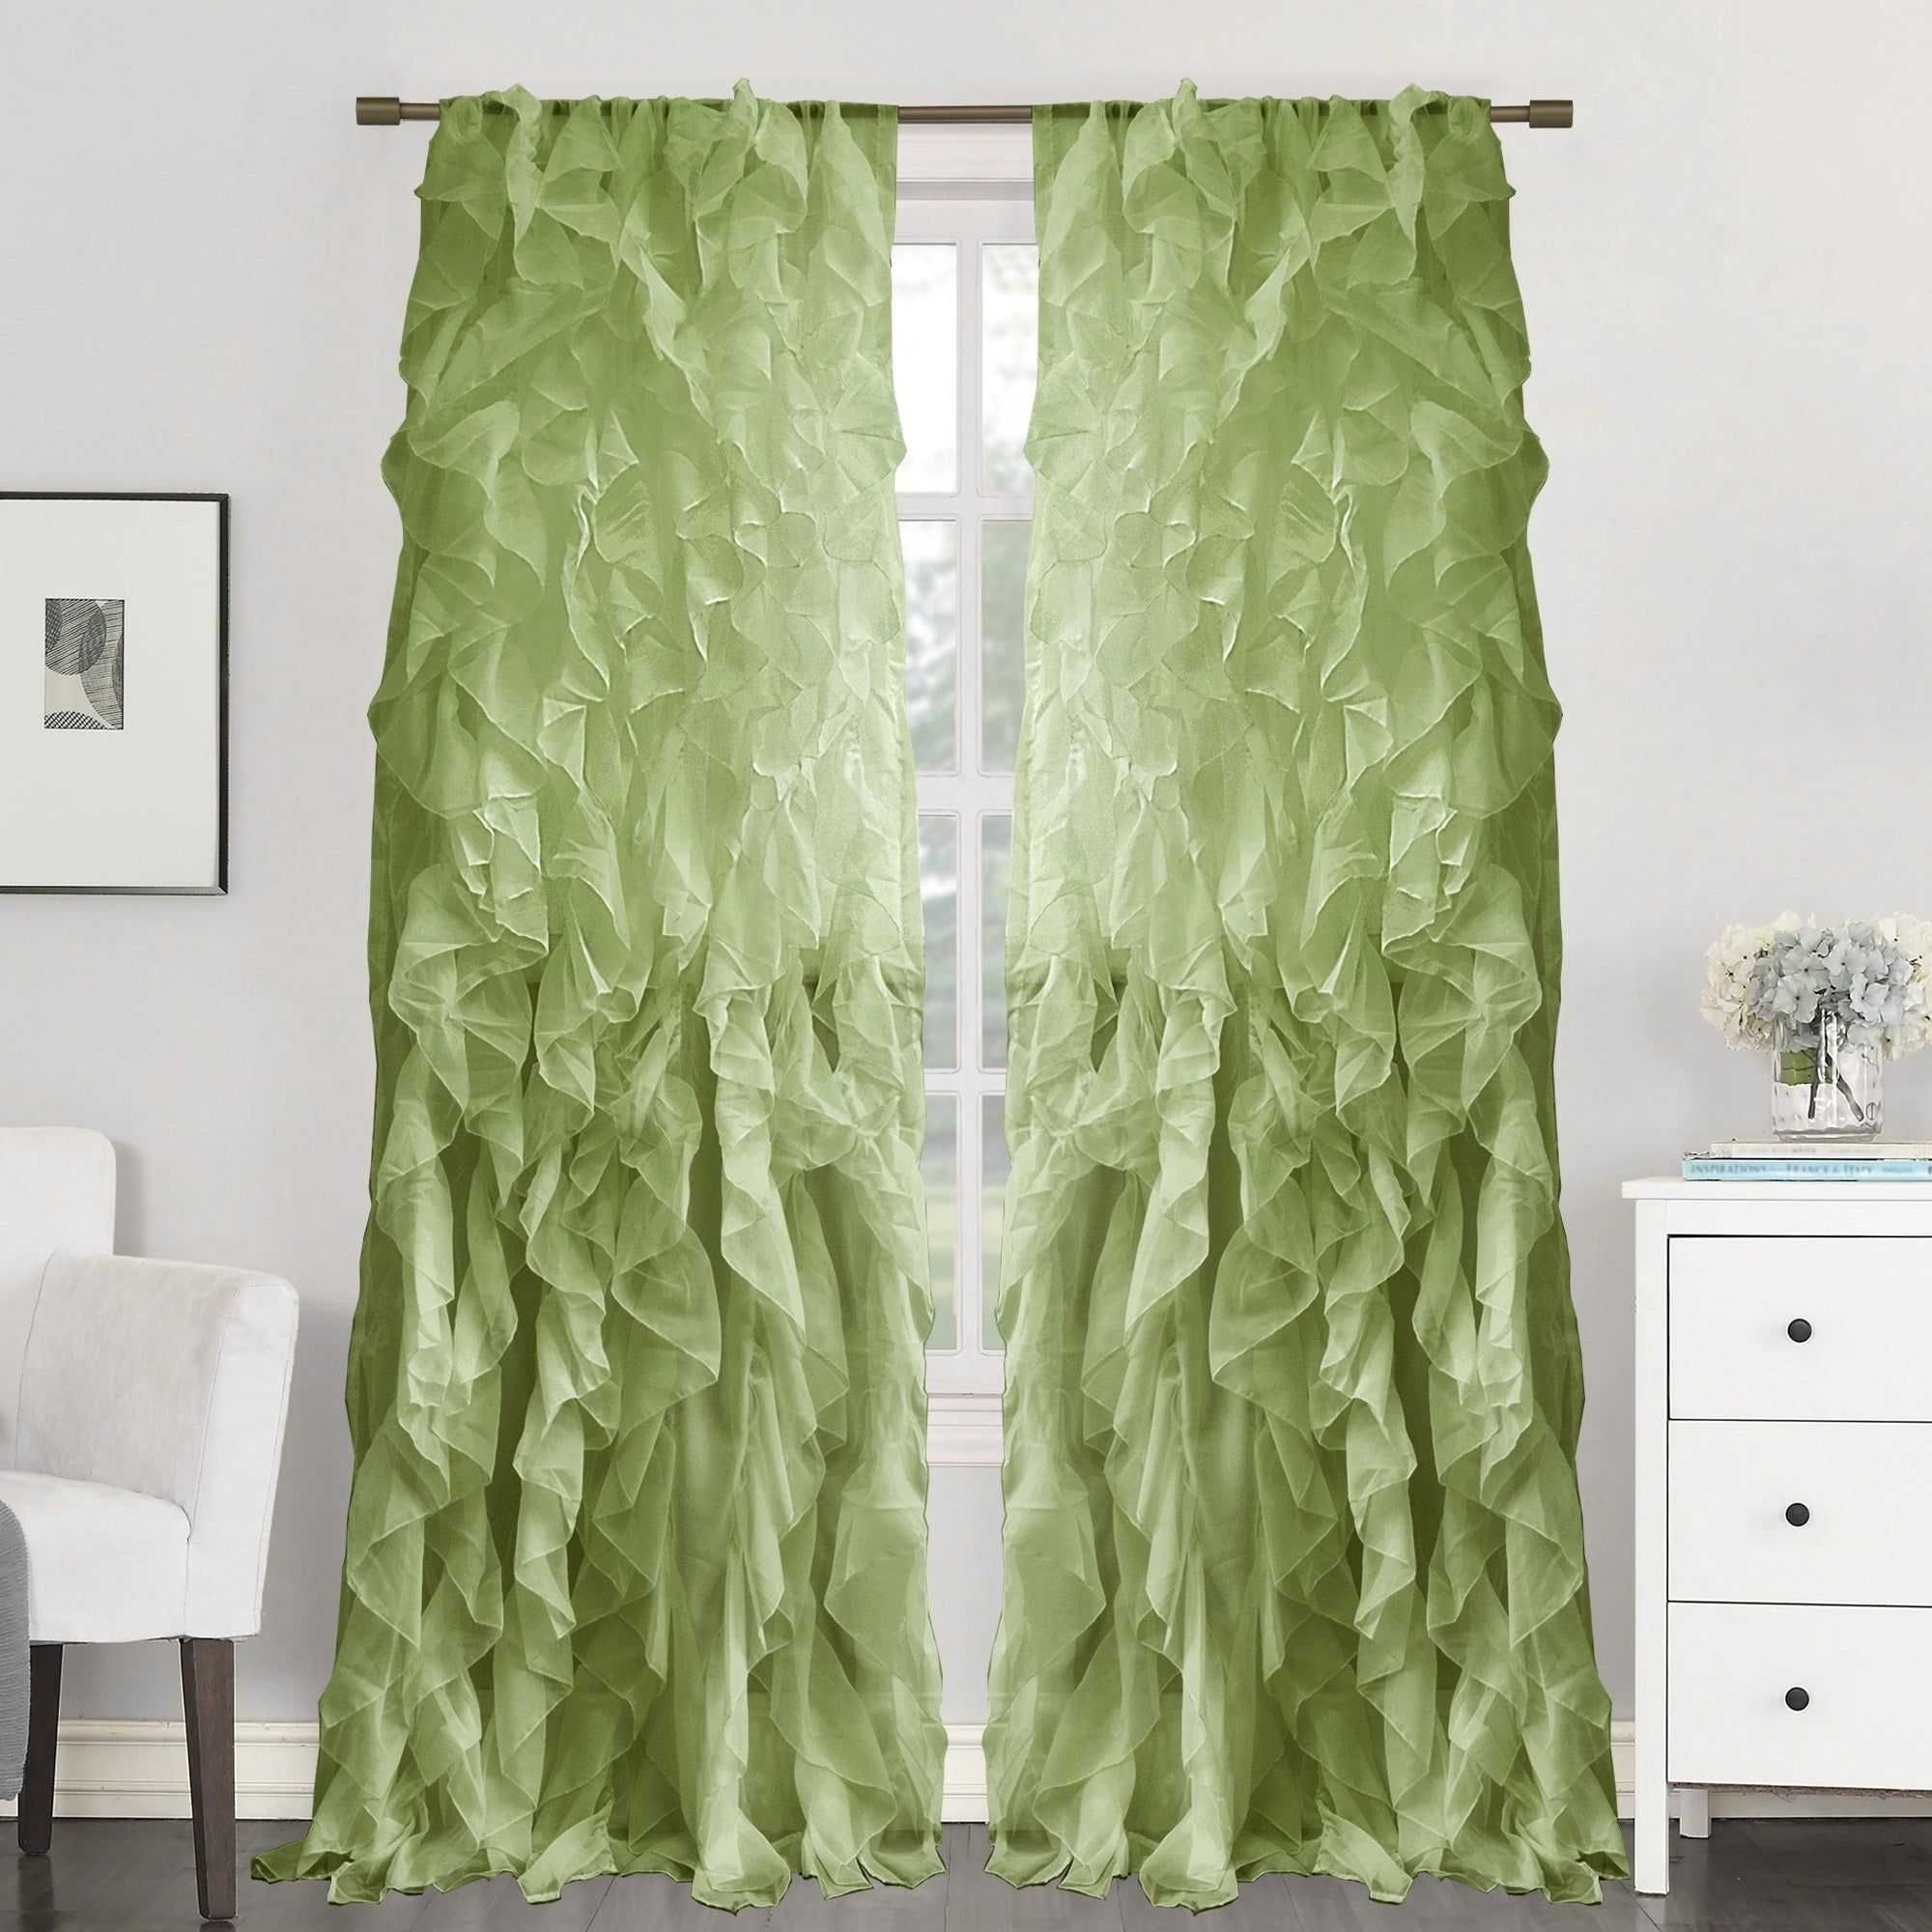 Sweet Home Collection Sheer Voile Waterfall Ruffled Tier 96 Inch Single  Curtain Panel – 96" Long X 50" Wide Throughout Sheer Voile Waterfall Ruffled Tier Single Curtain Panels (View 3 of 20)